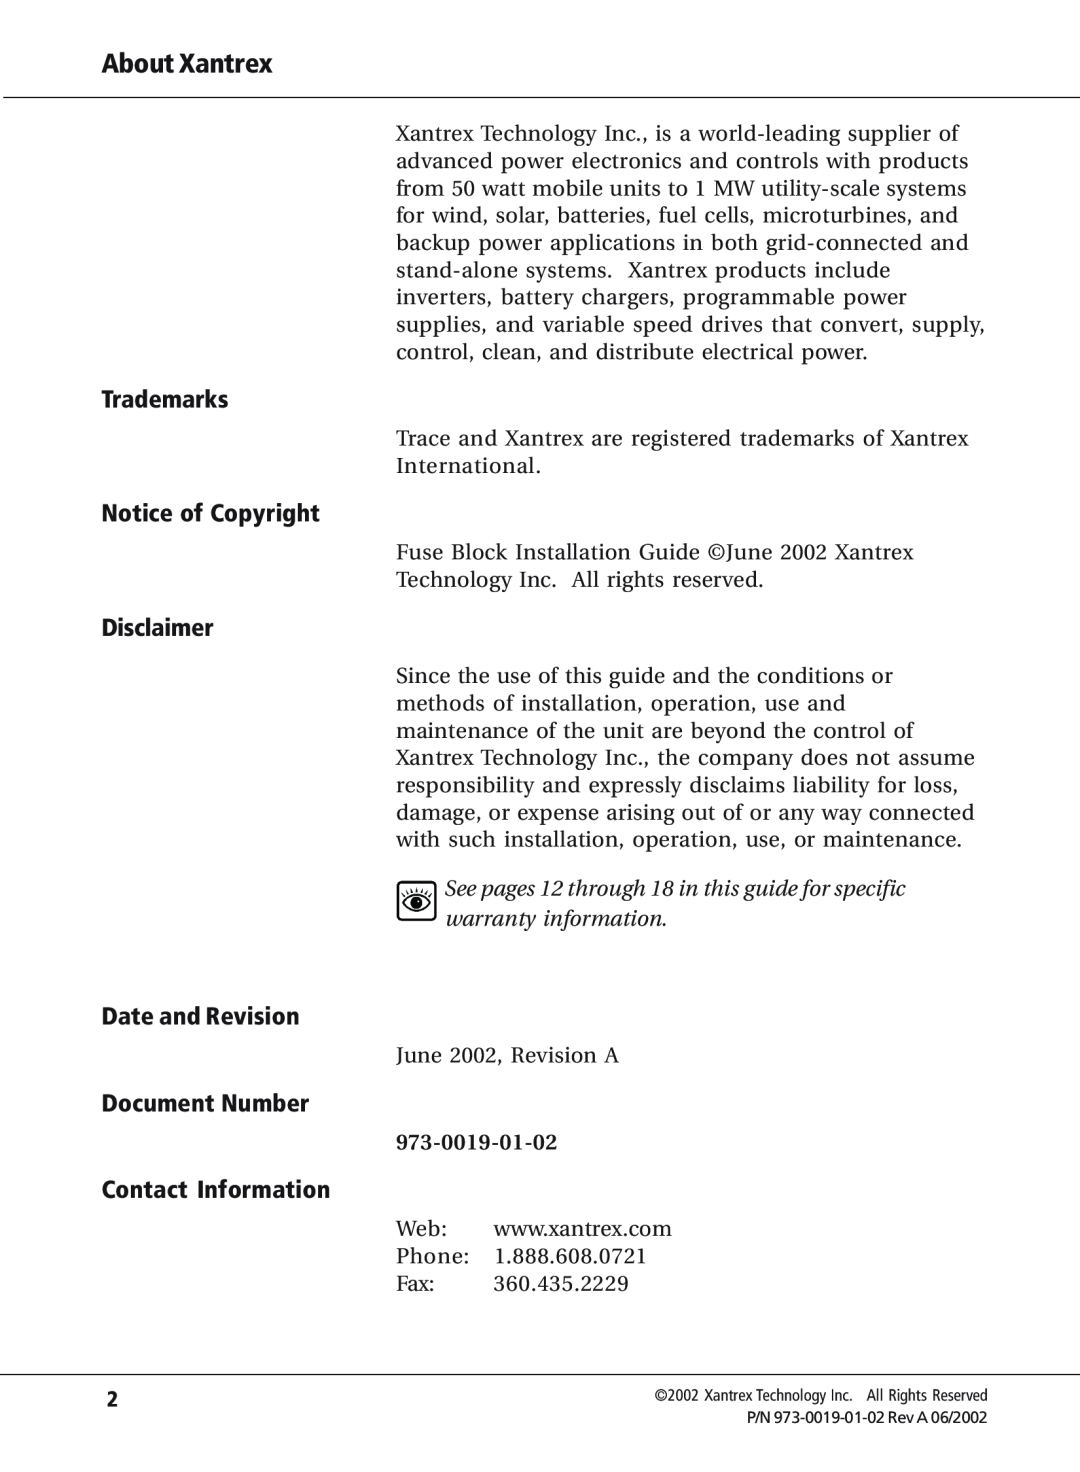 Xantrex Technology TFB400 About Xantrex, Trademarks, Notice of Copyright, Disclaimer, Date and Revision, Document Number 